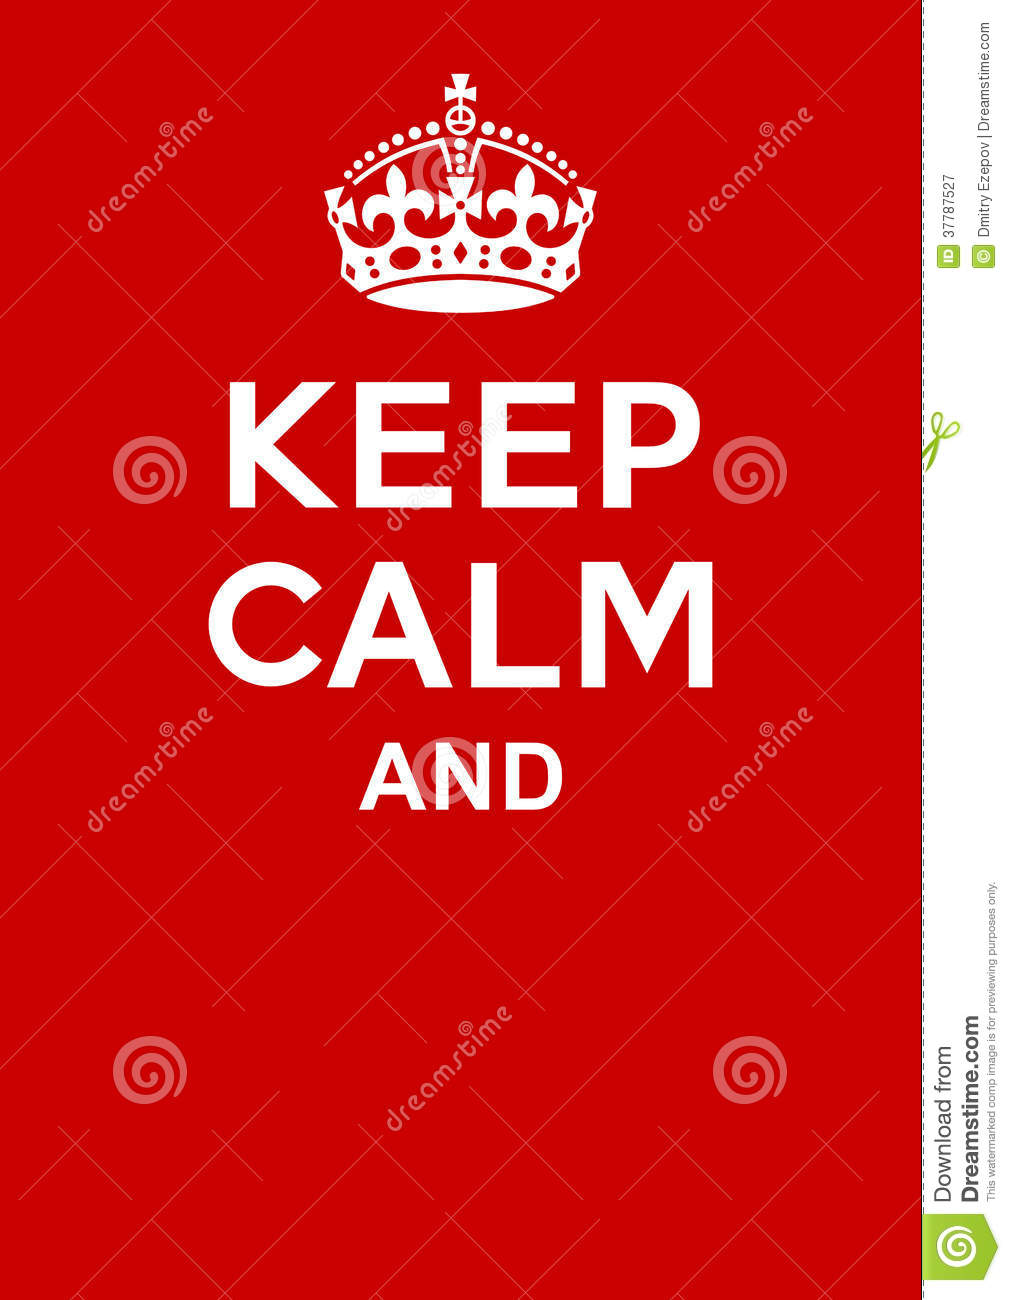 Keep Calm Poster Royalty Free Stock Photography   Image  37787527